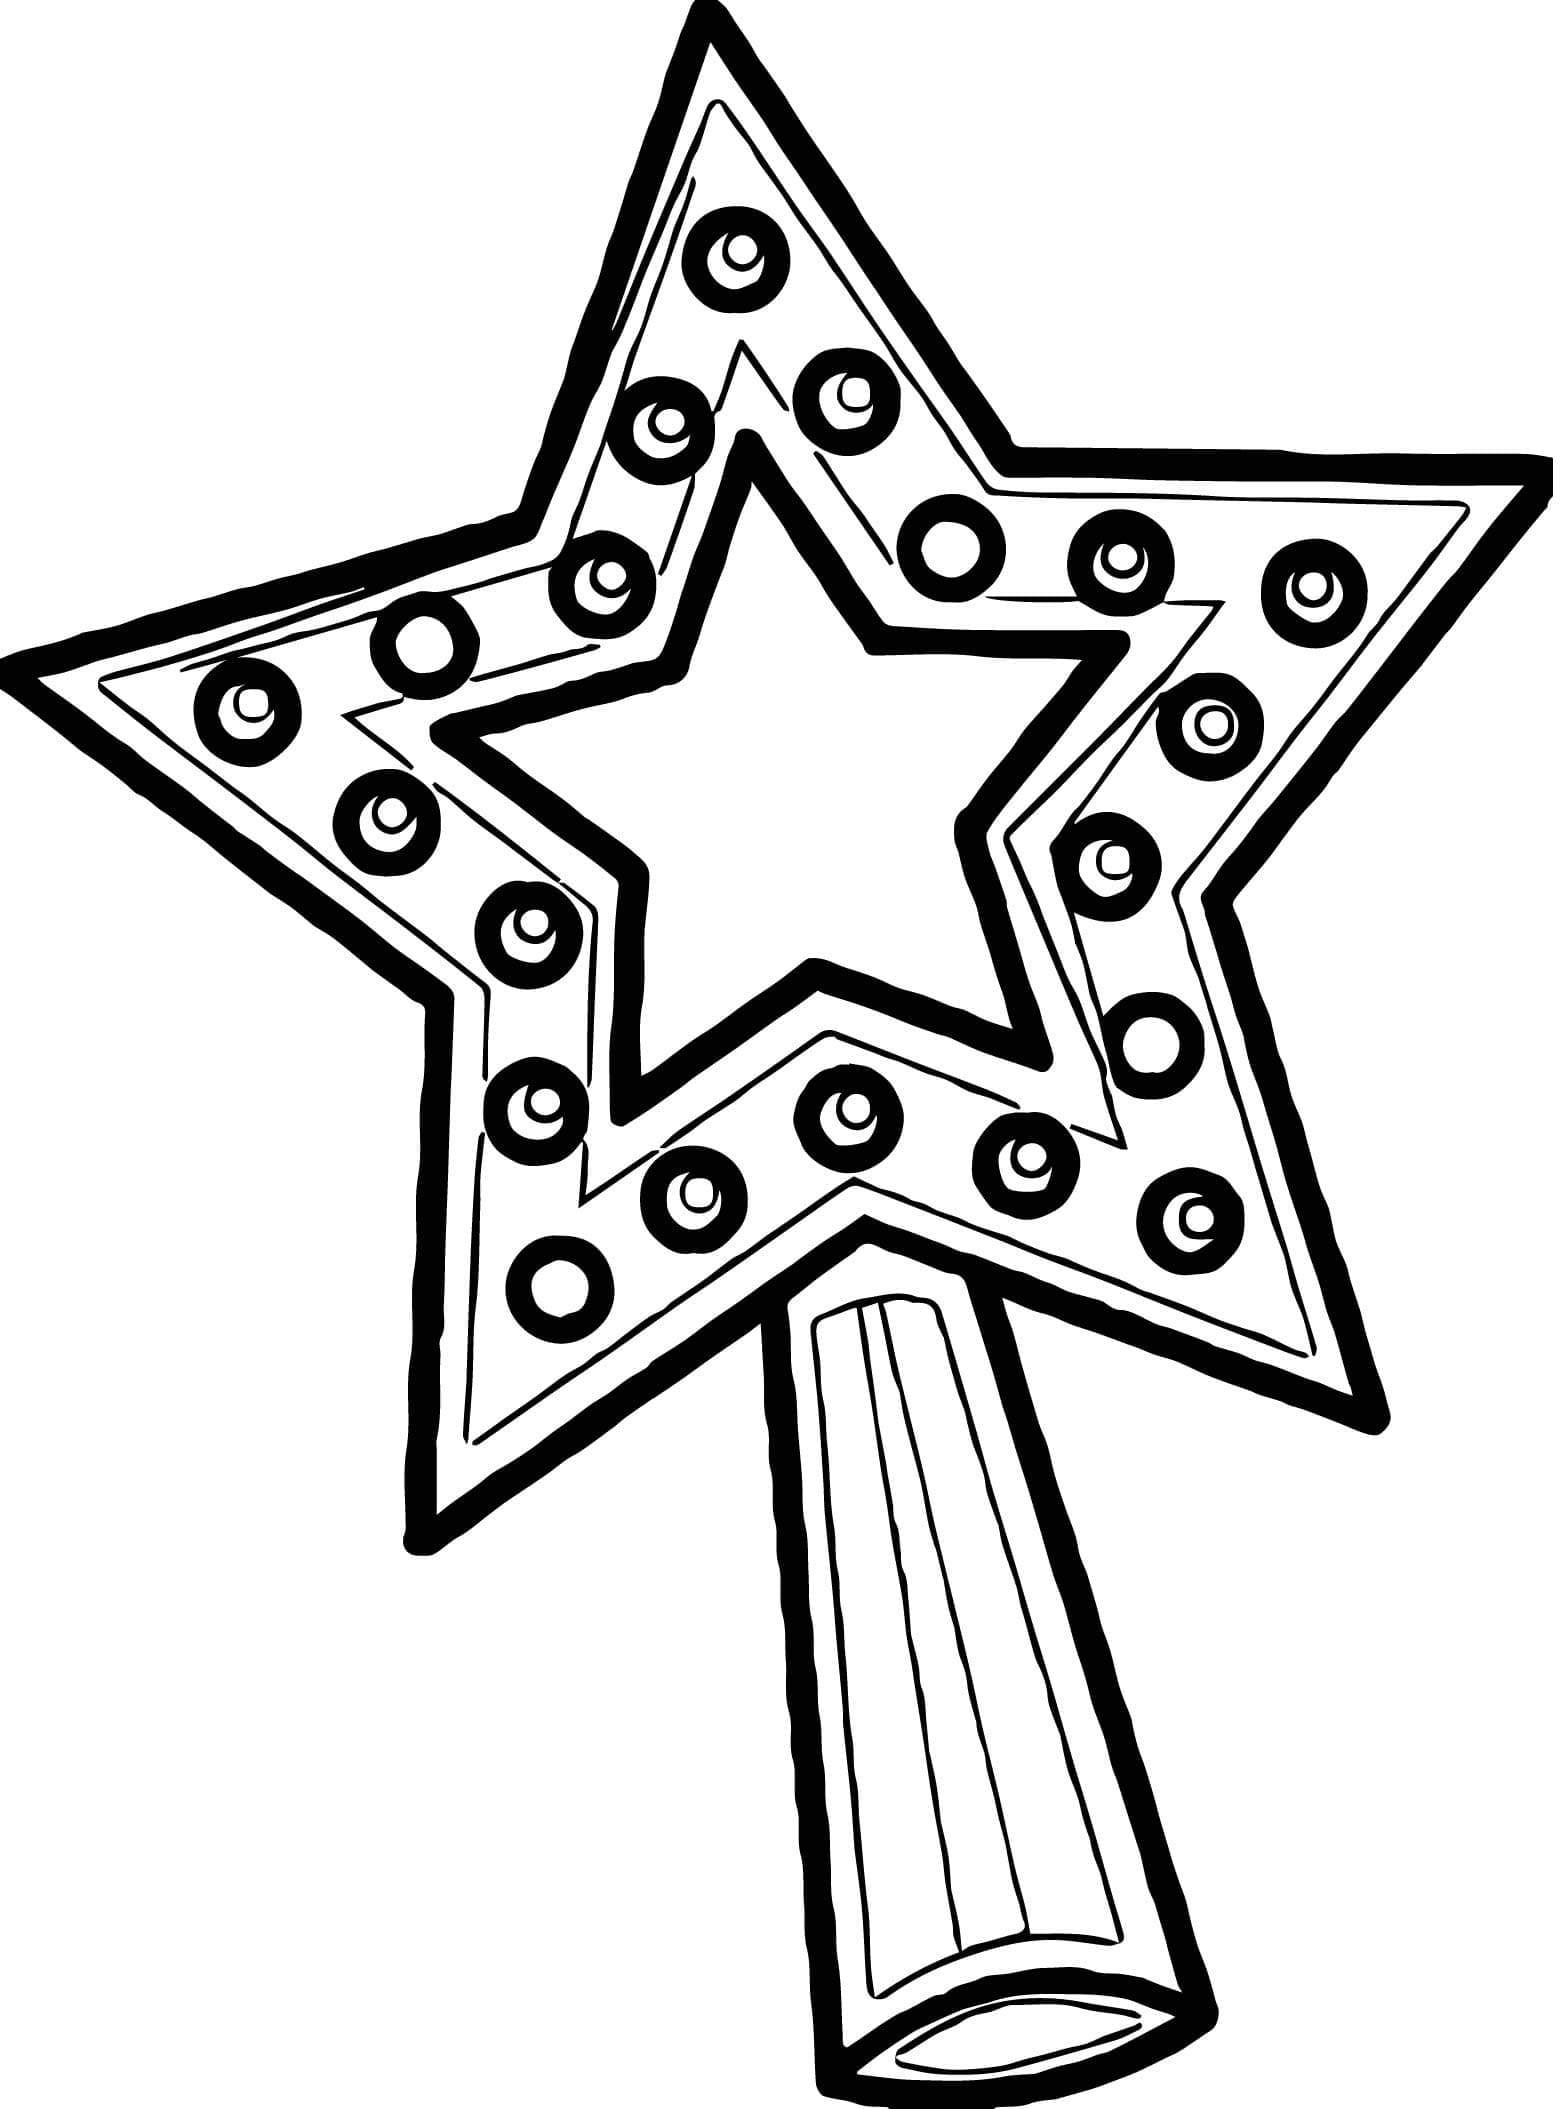 Christmas Star Free coloring page Download Print or Color Online for